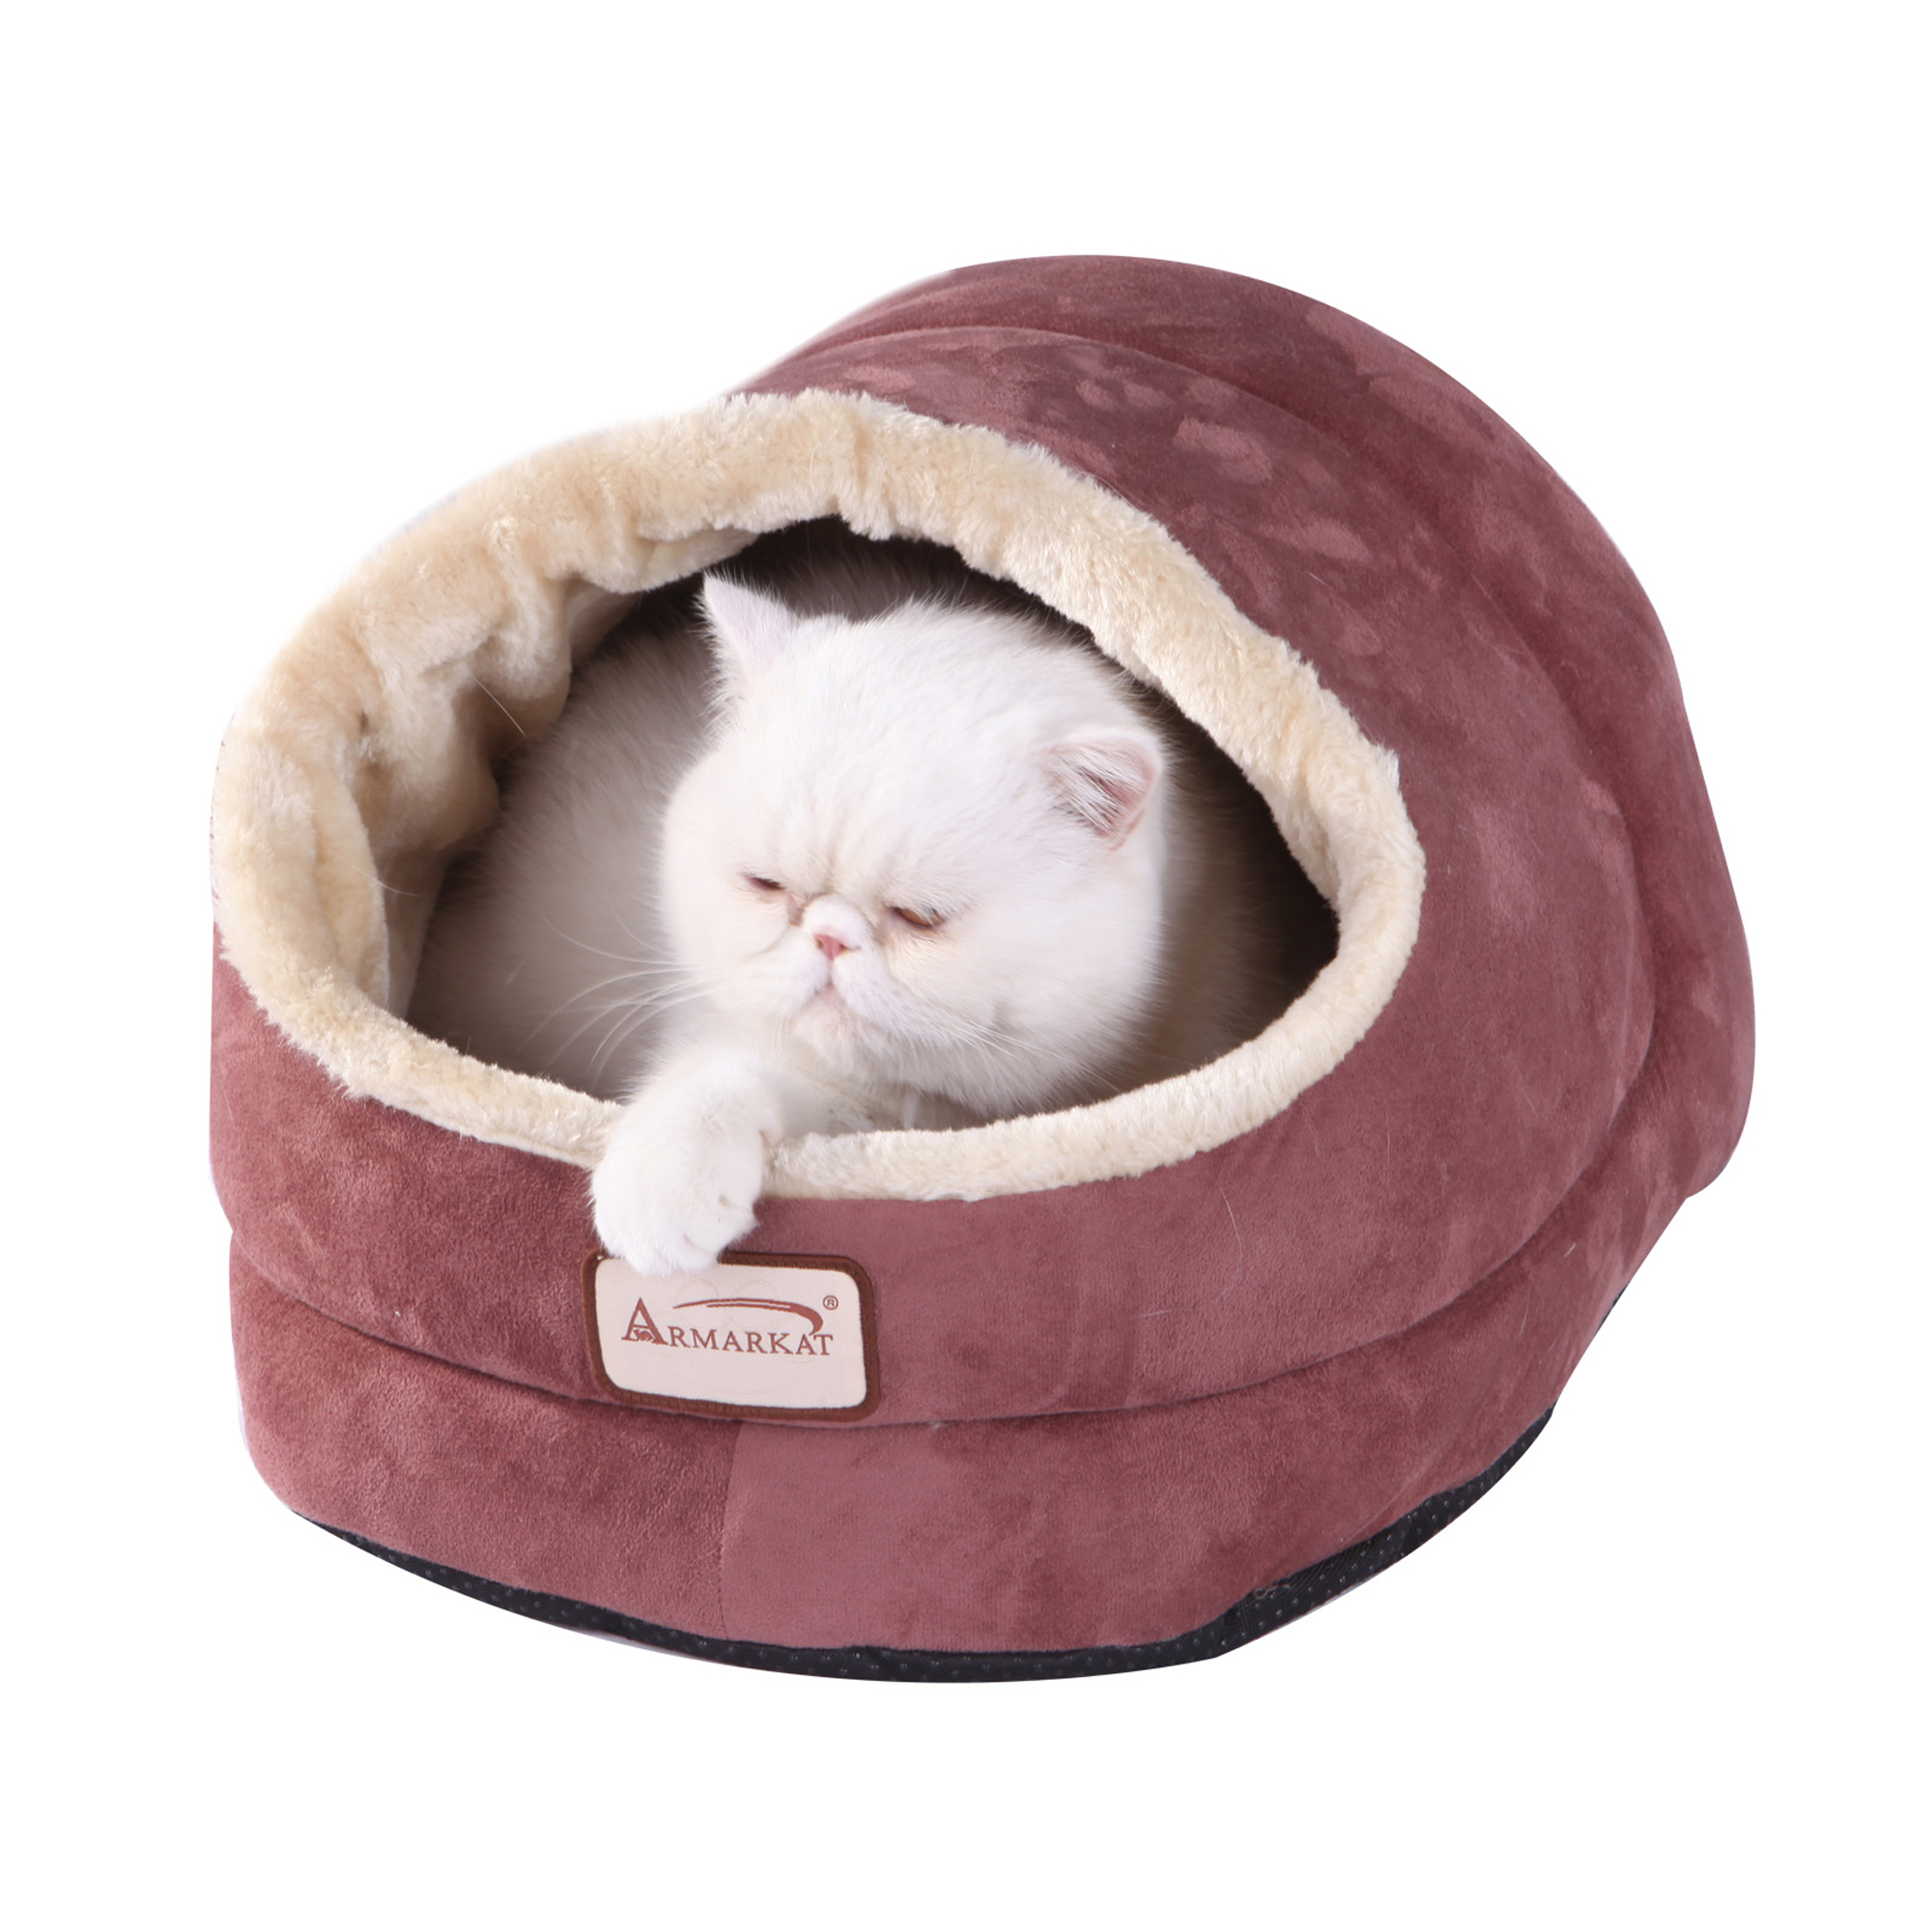 Picture of Aeromark C18HTH-MH Armarkat Pet Bed Cat Bed 18 x 12 x 14 - Indian Red & Beige